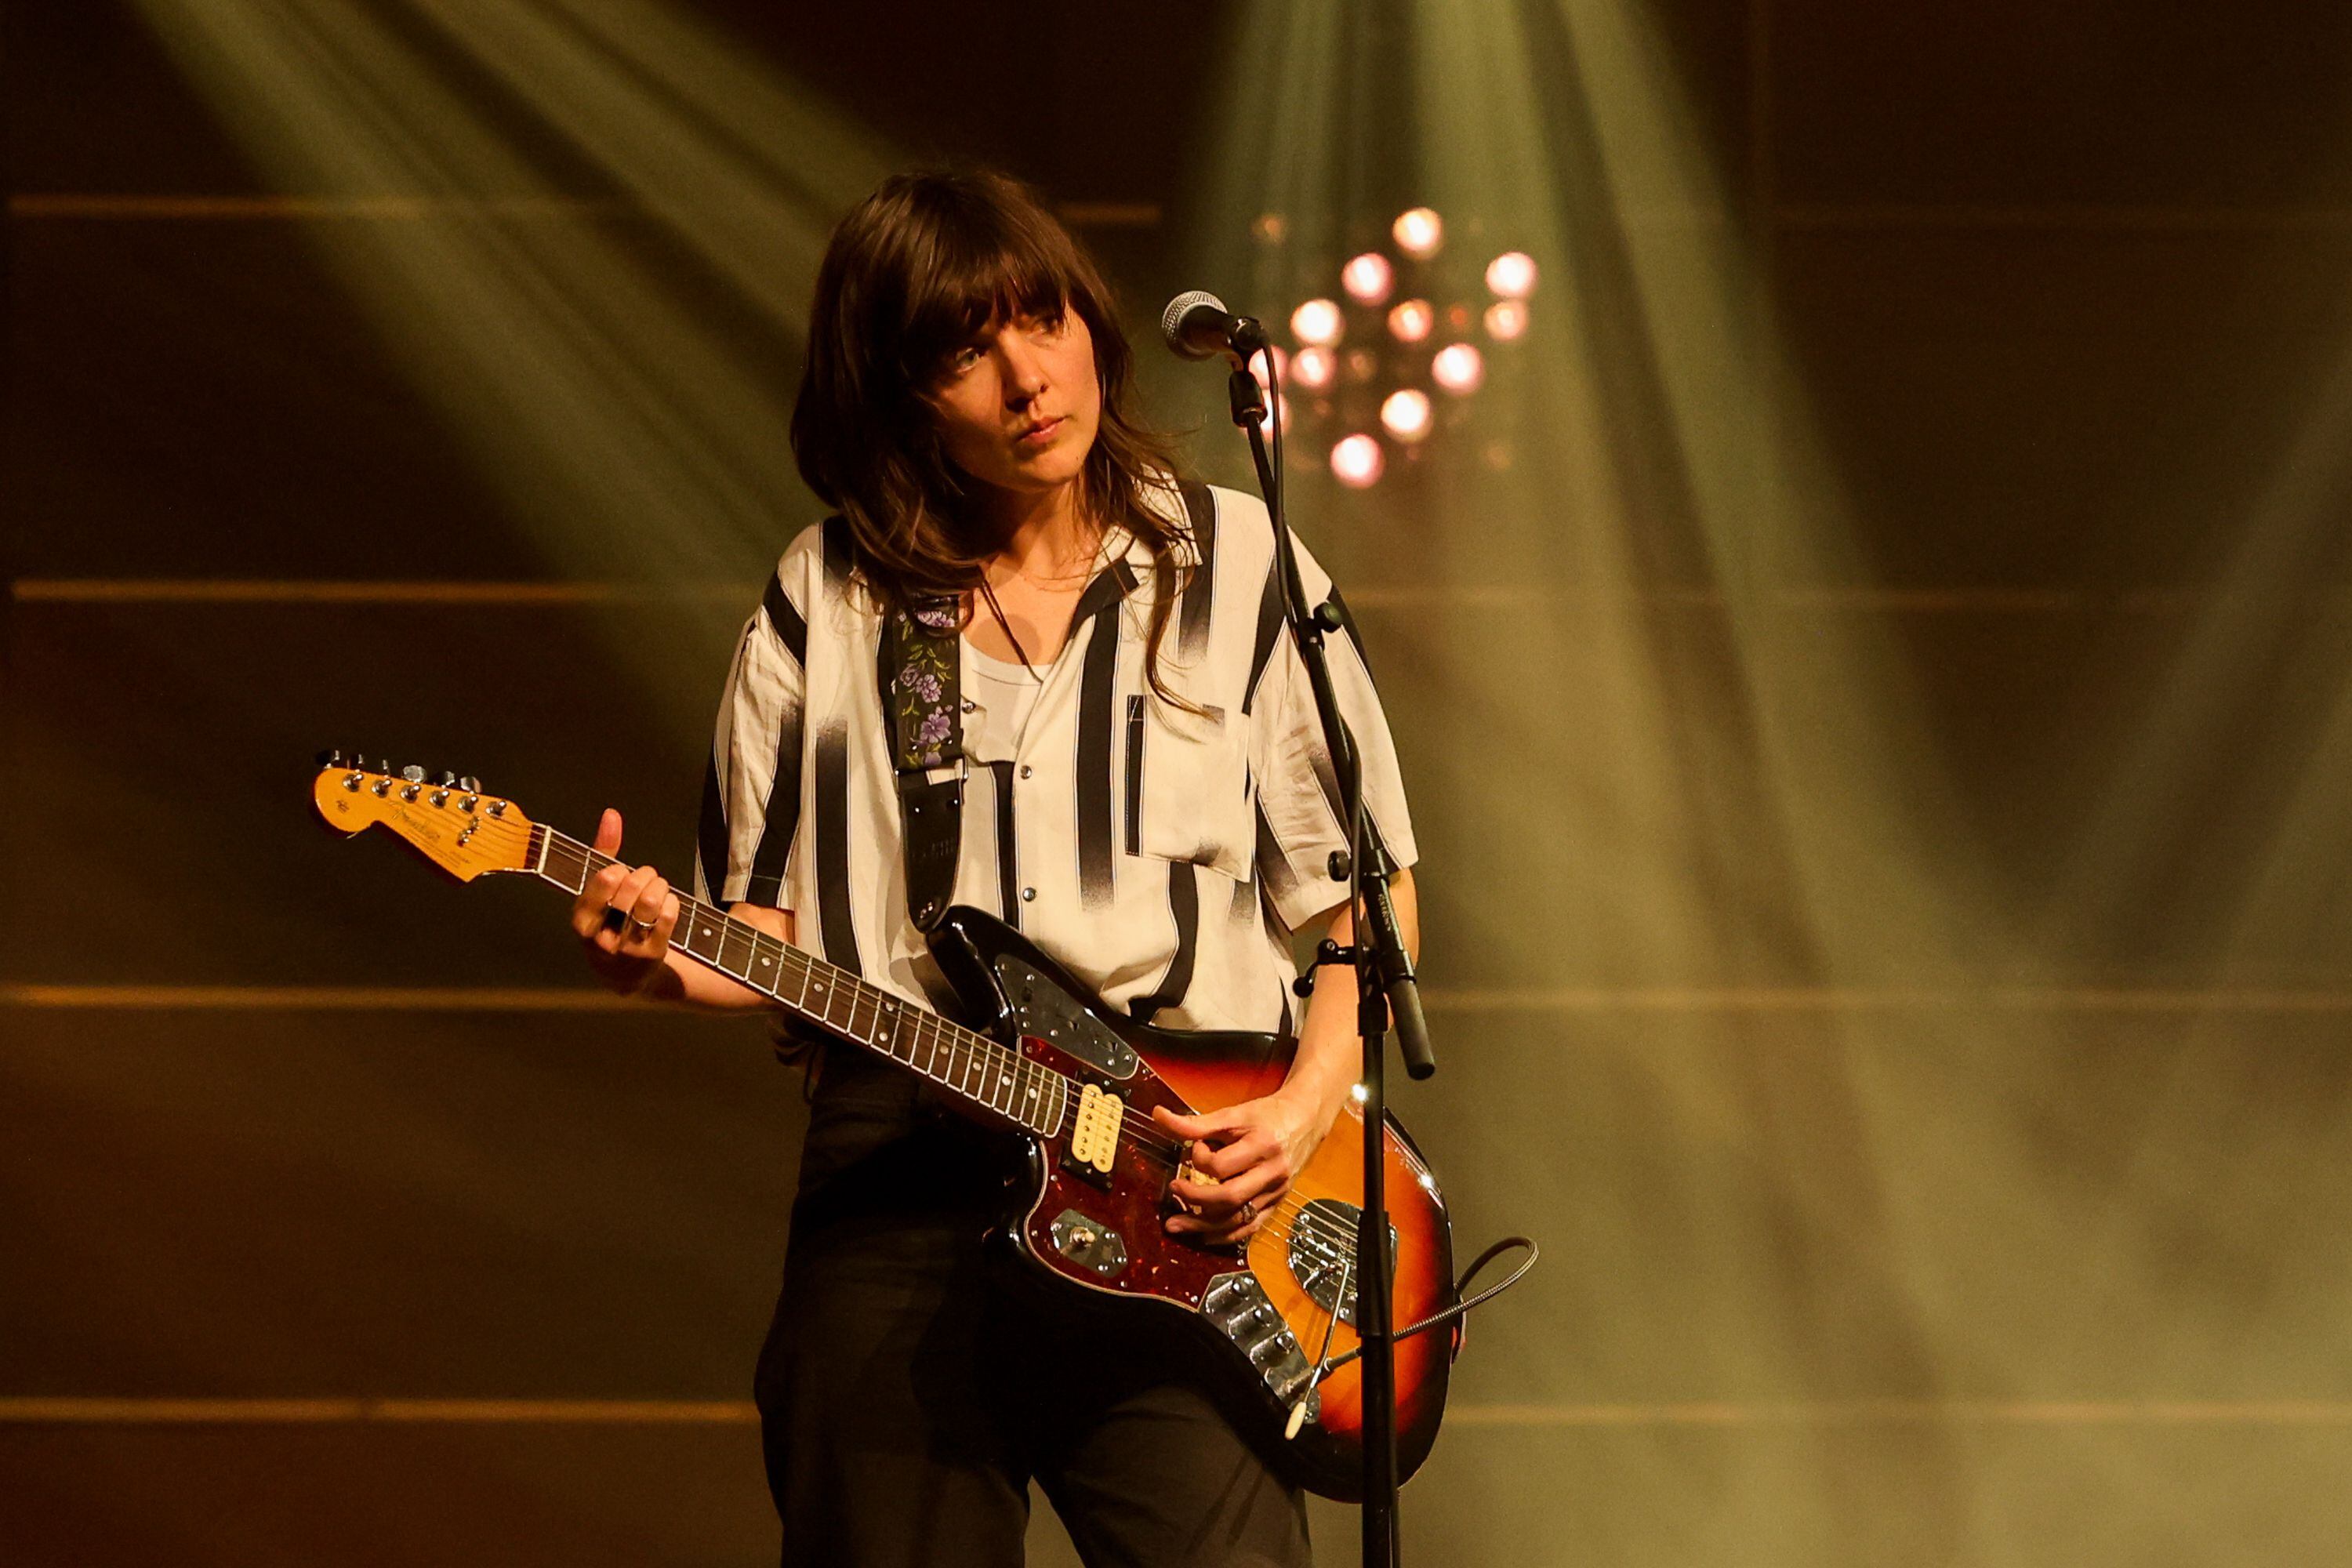 Courtney Barnett is redefining what it means to be a rock star